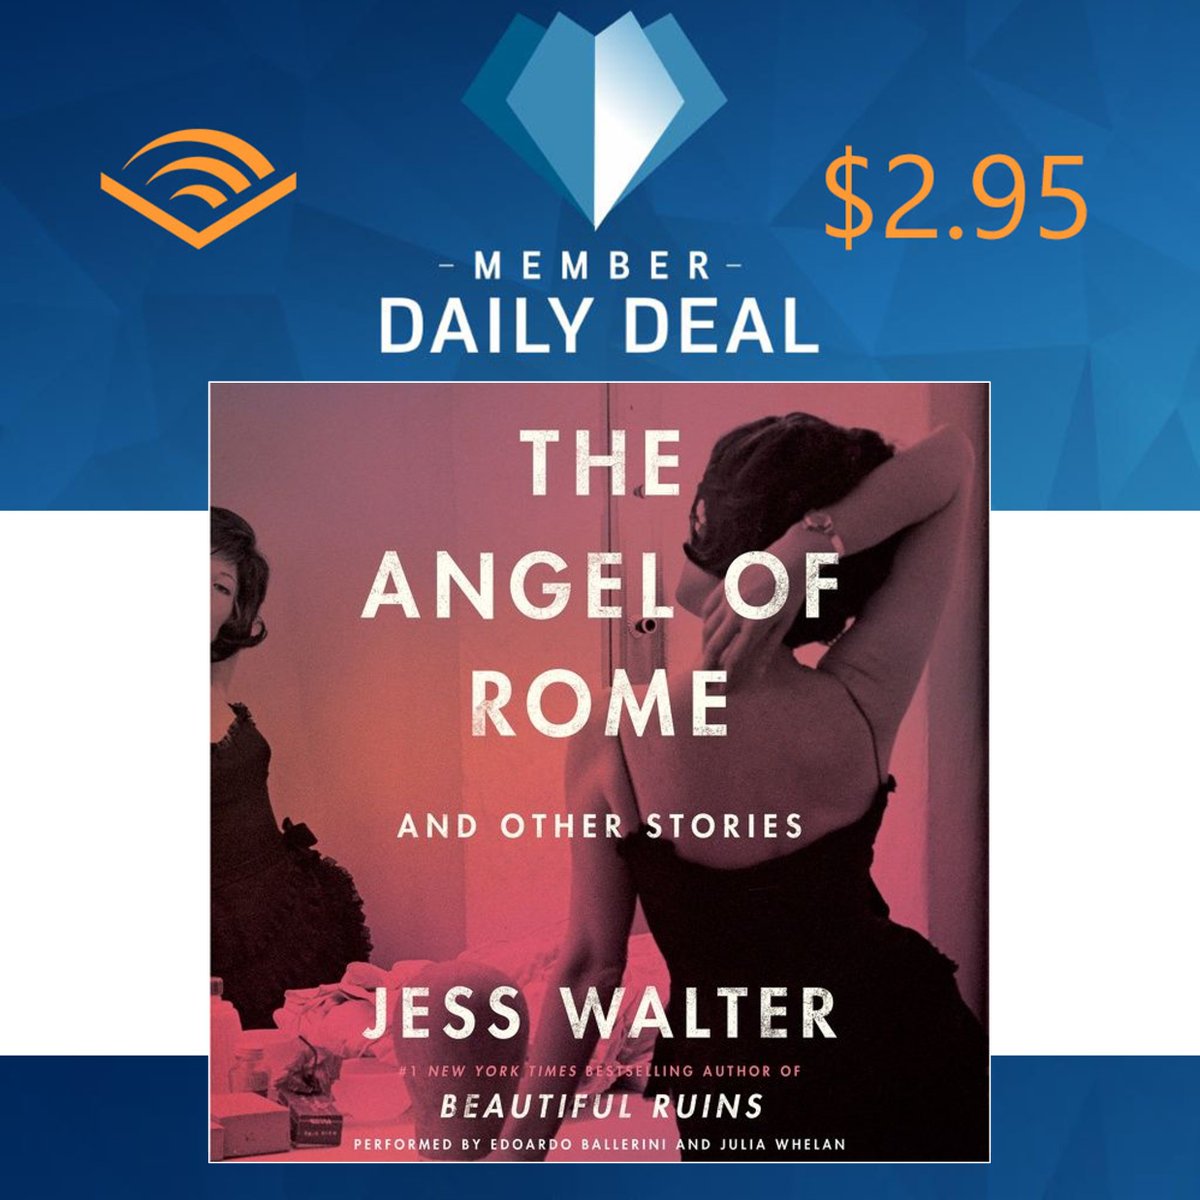 TODAY ONLY - Get The Angel of Rome by @1JessWalter and read by @edoballerini & @justjuliawhelan for the @audible_com #DailyDeal price of $2.95 ➡️ adbl.co/3MlQofS